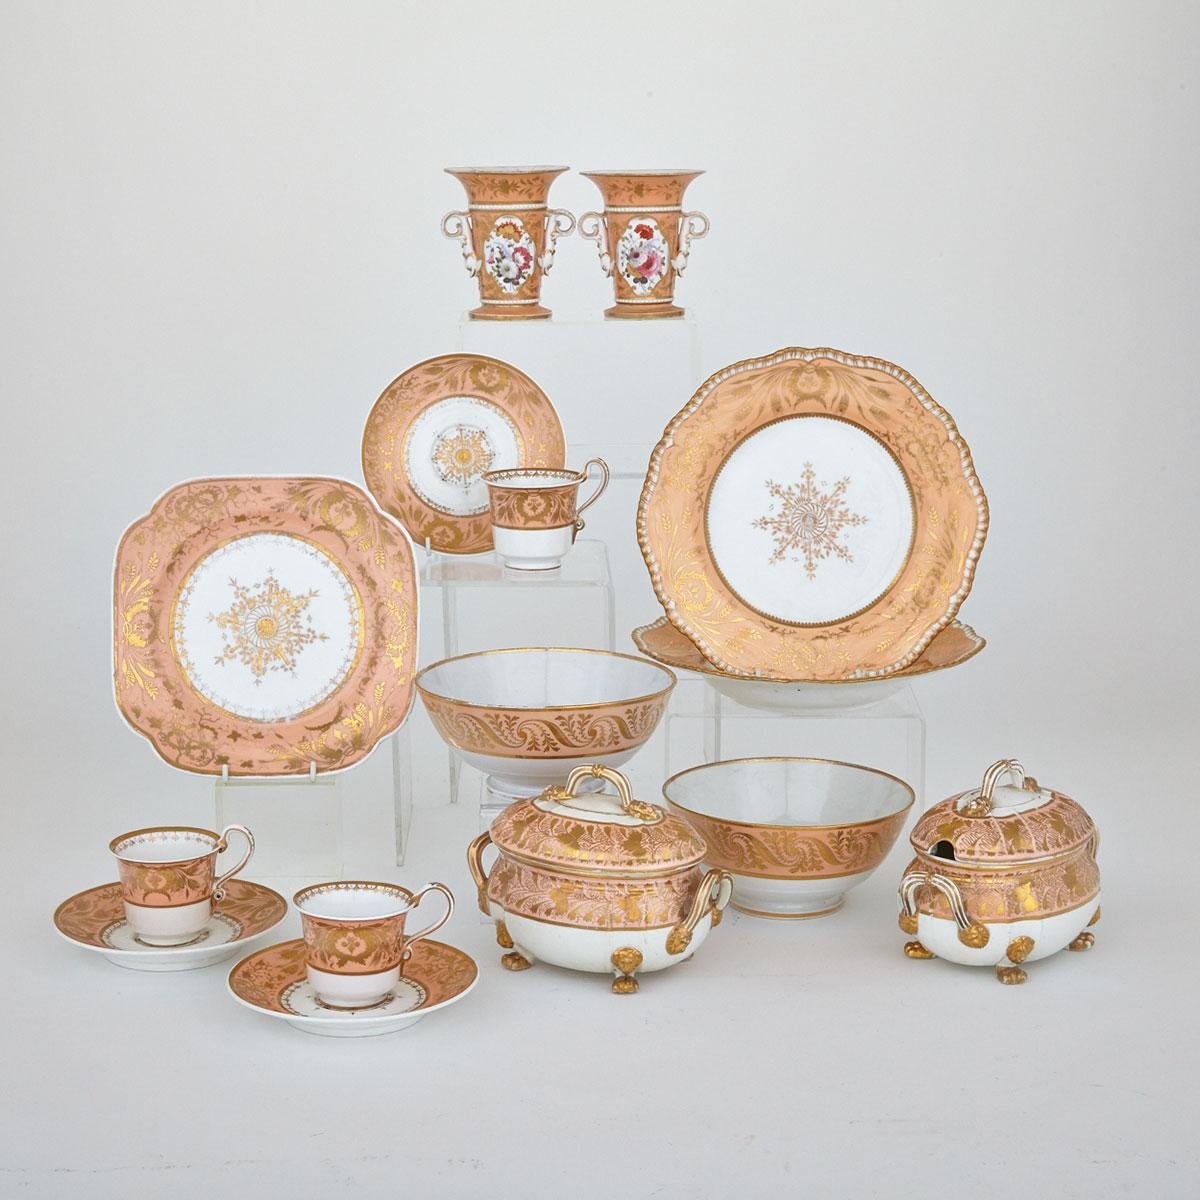 Group of English Porcelain, 19th century